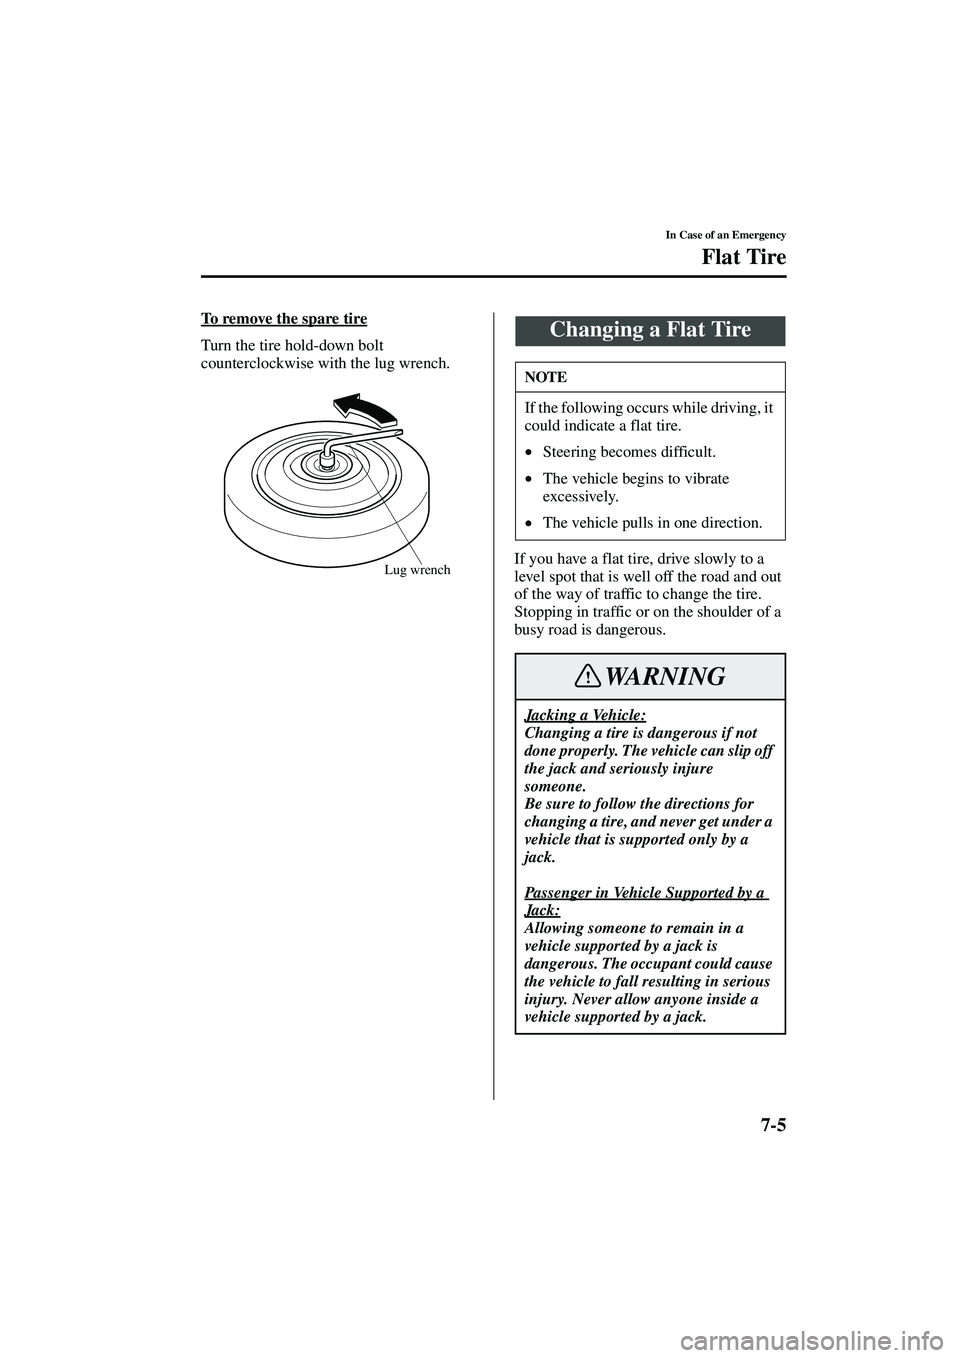 MAZDA MODEL MX-5 MIATA 2003  Owners Manual 7-5
In Case of an Emergency
Flat Tire
Form No. 8R09-EA-02G
To remove the spare tire
Turn the tire hold-down bolt 
counterclockwise with the lug wrench.If you have a flat tire, drive slowly to a 
level